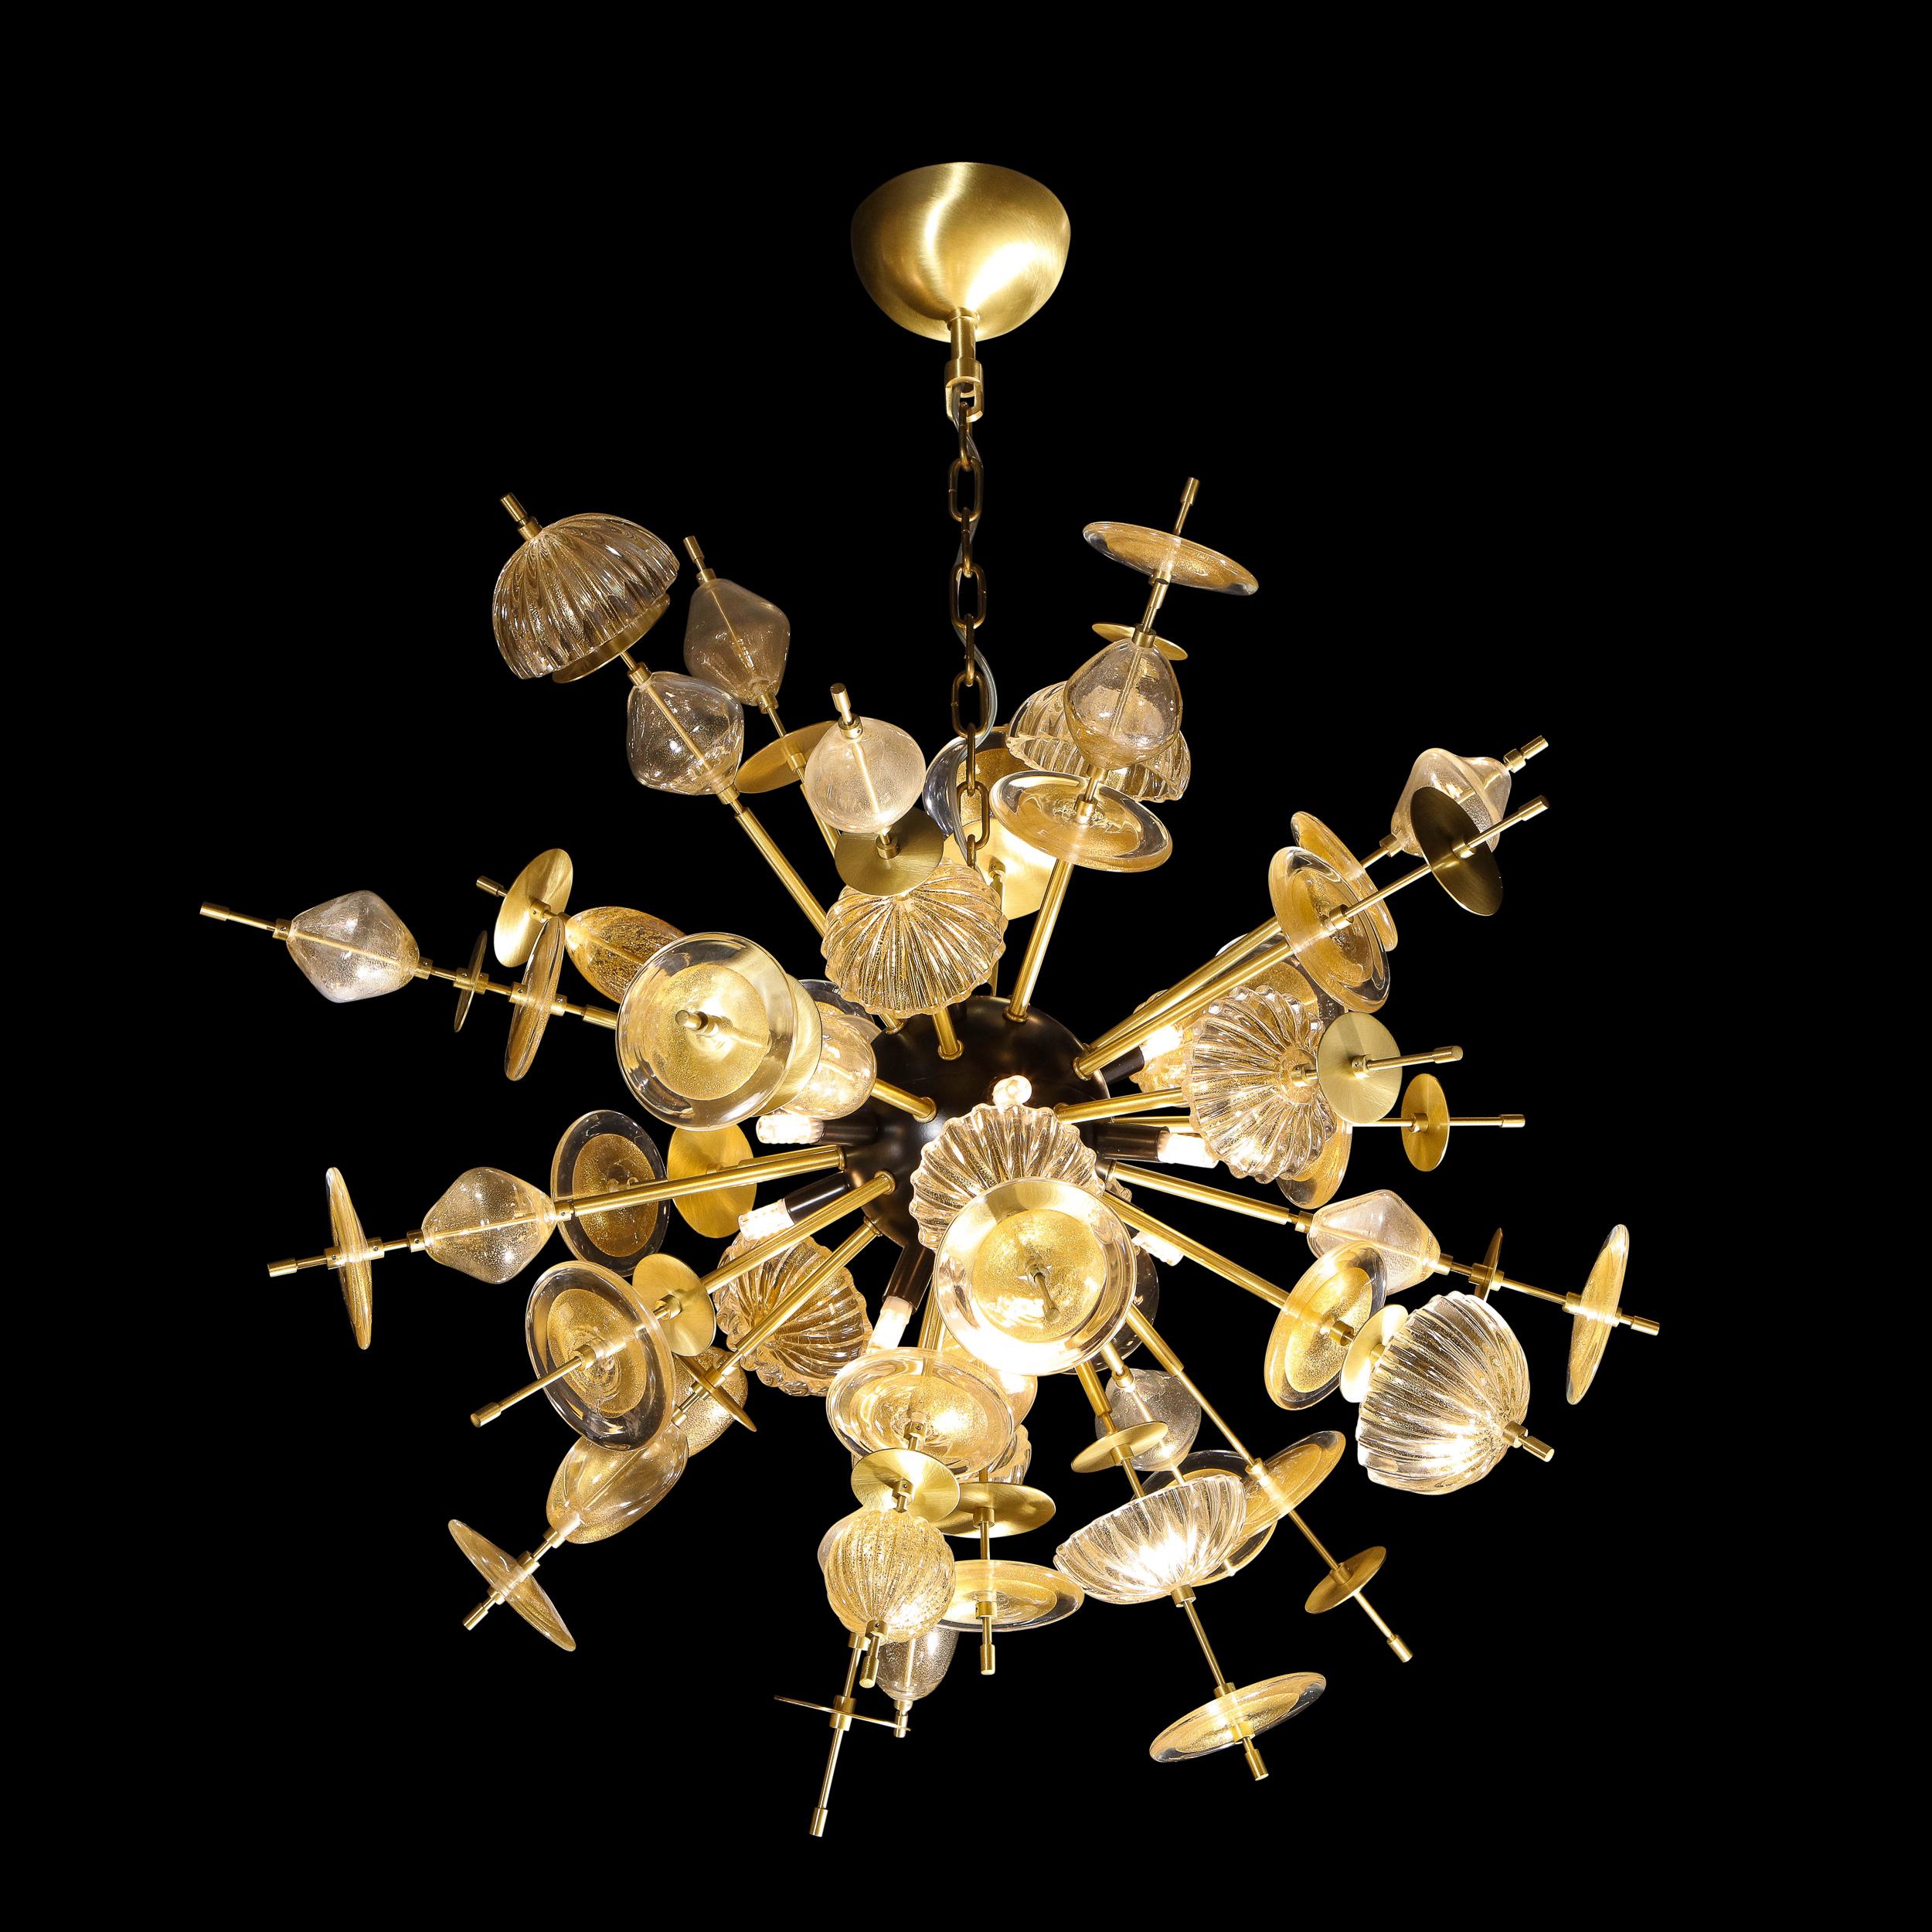 This stunning modernist sputnik was realized in Murano, Italy- the island off the coast of Venice renowned for centuries for its superlative glass production. It features a black enamel center with a wealth of brass spokes emanating outwards that